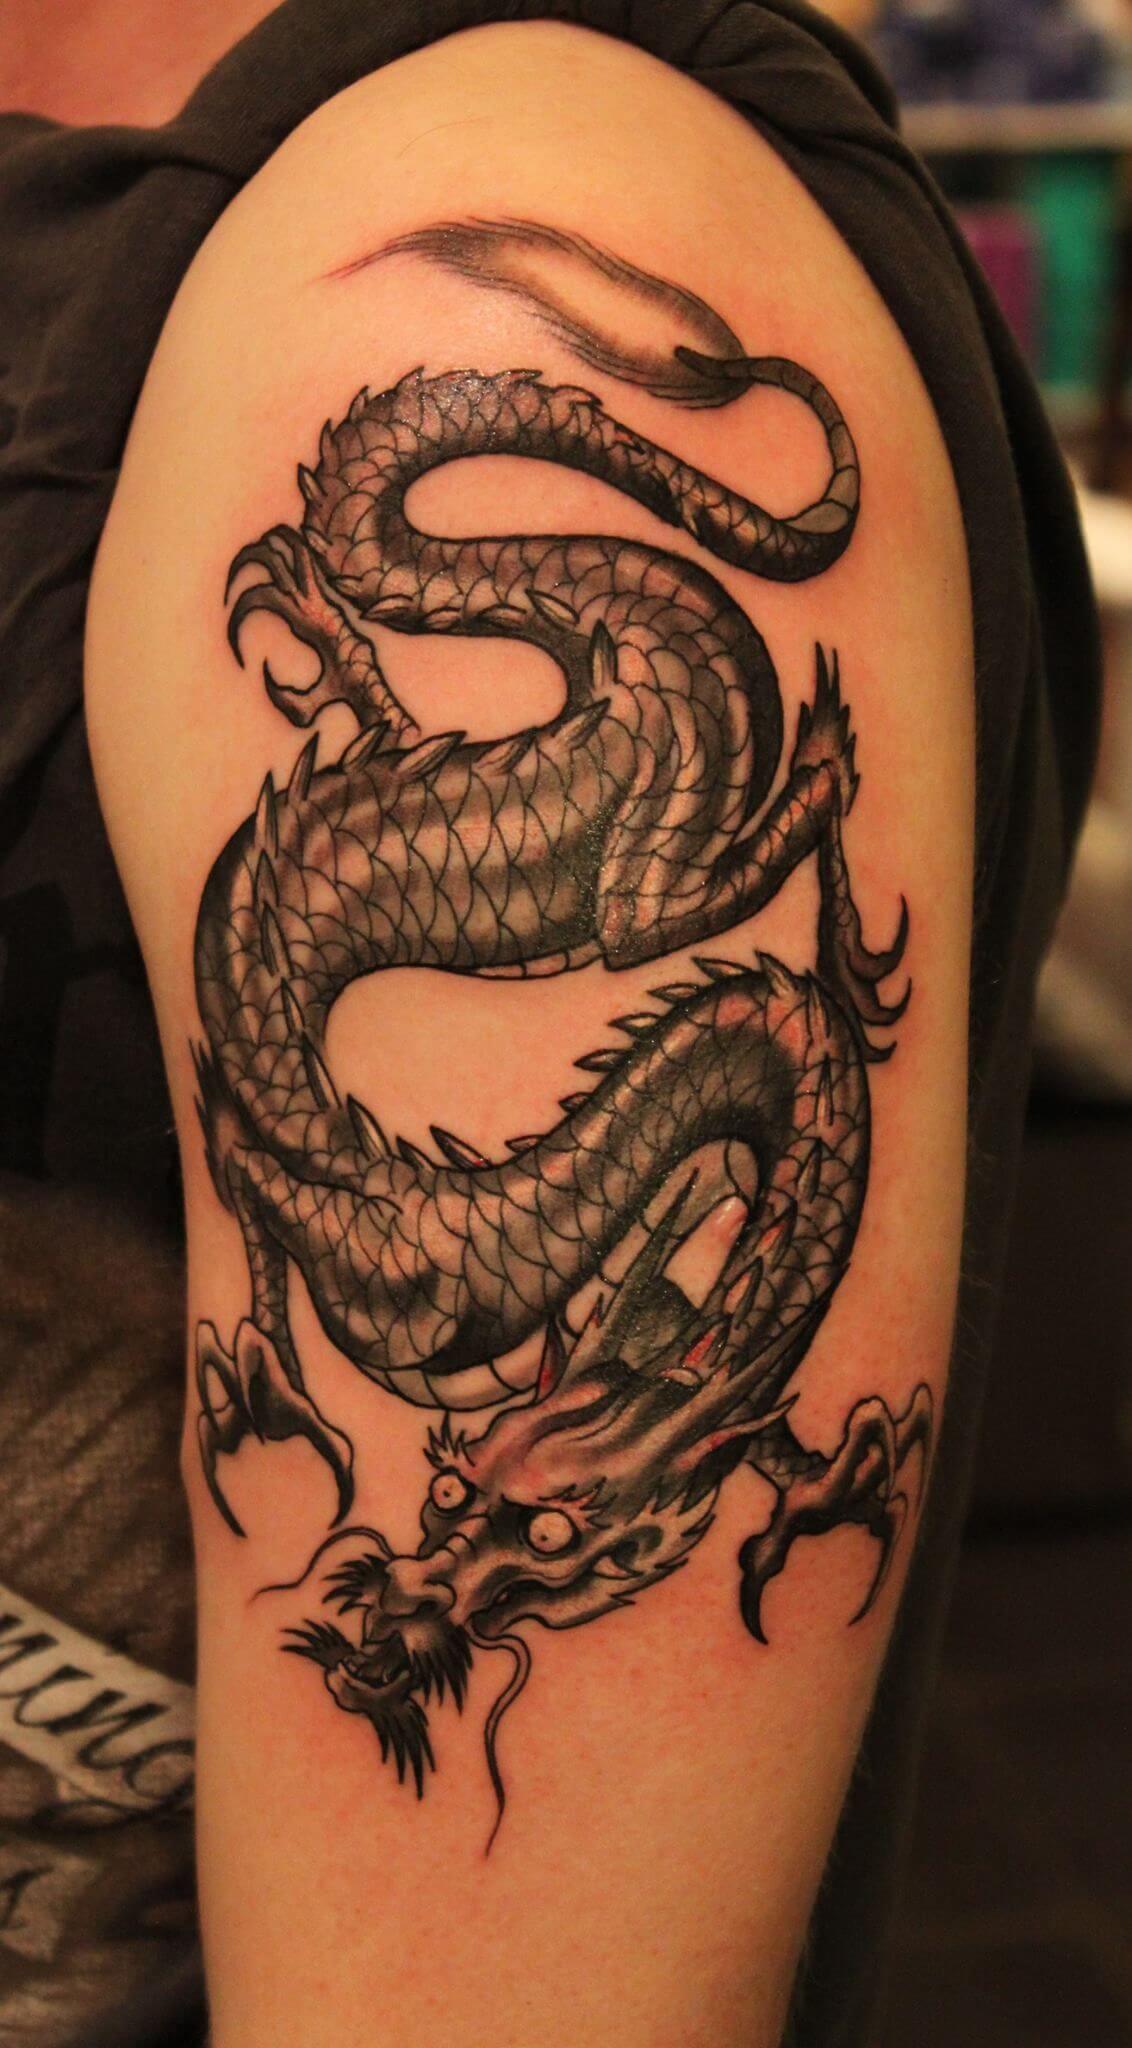 60 Dragon Tattoo Ideas To Copy To Live Your Fairytale ...